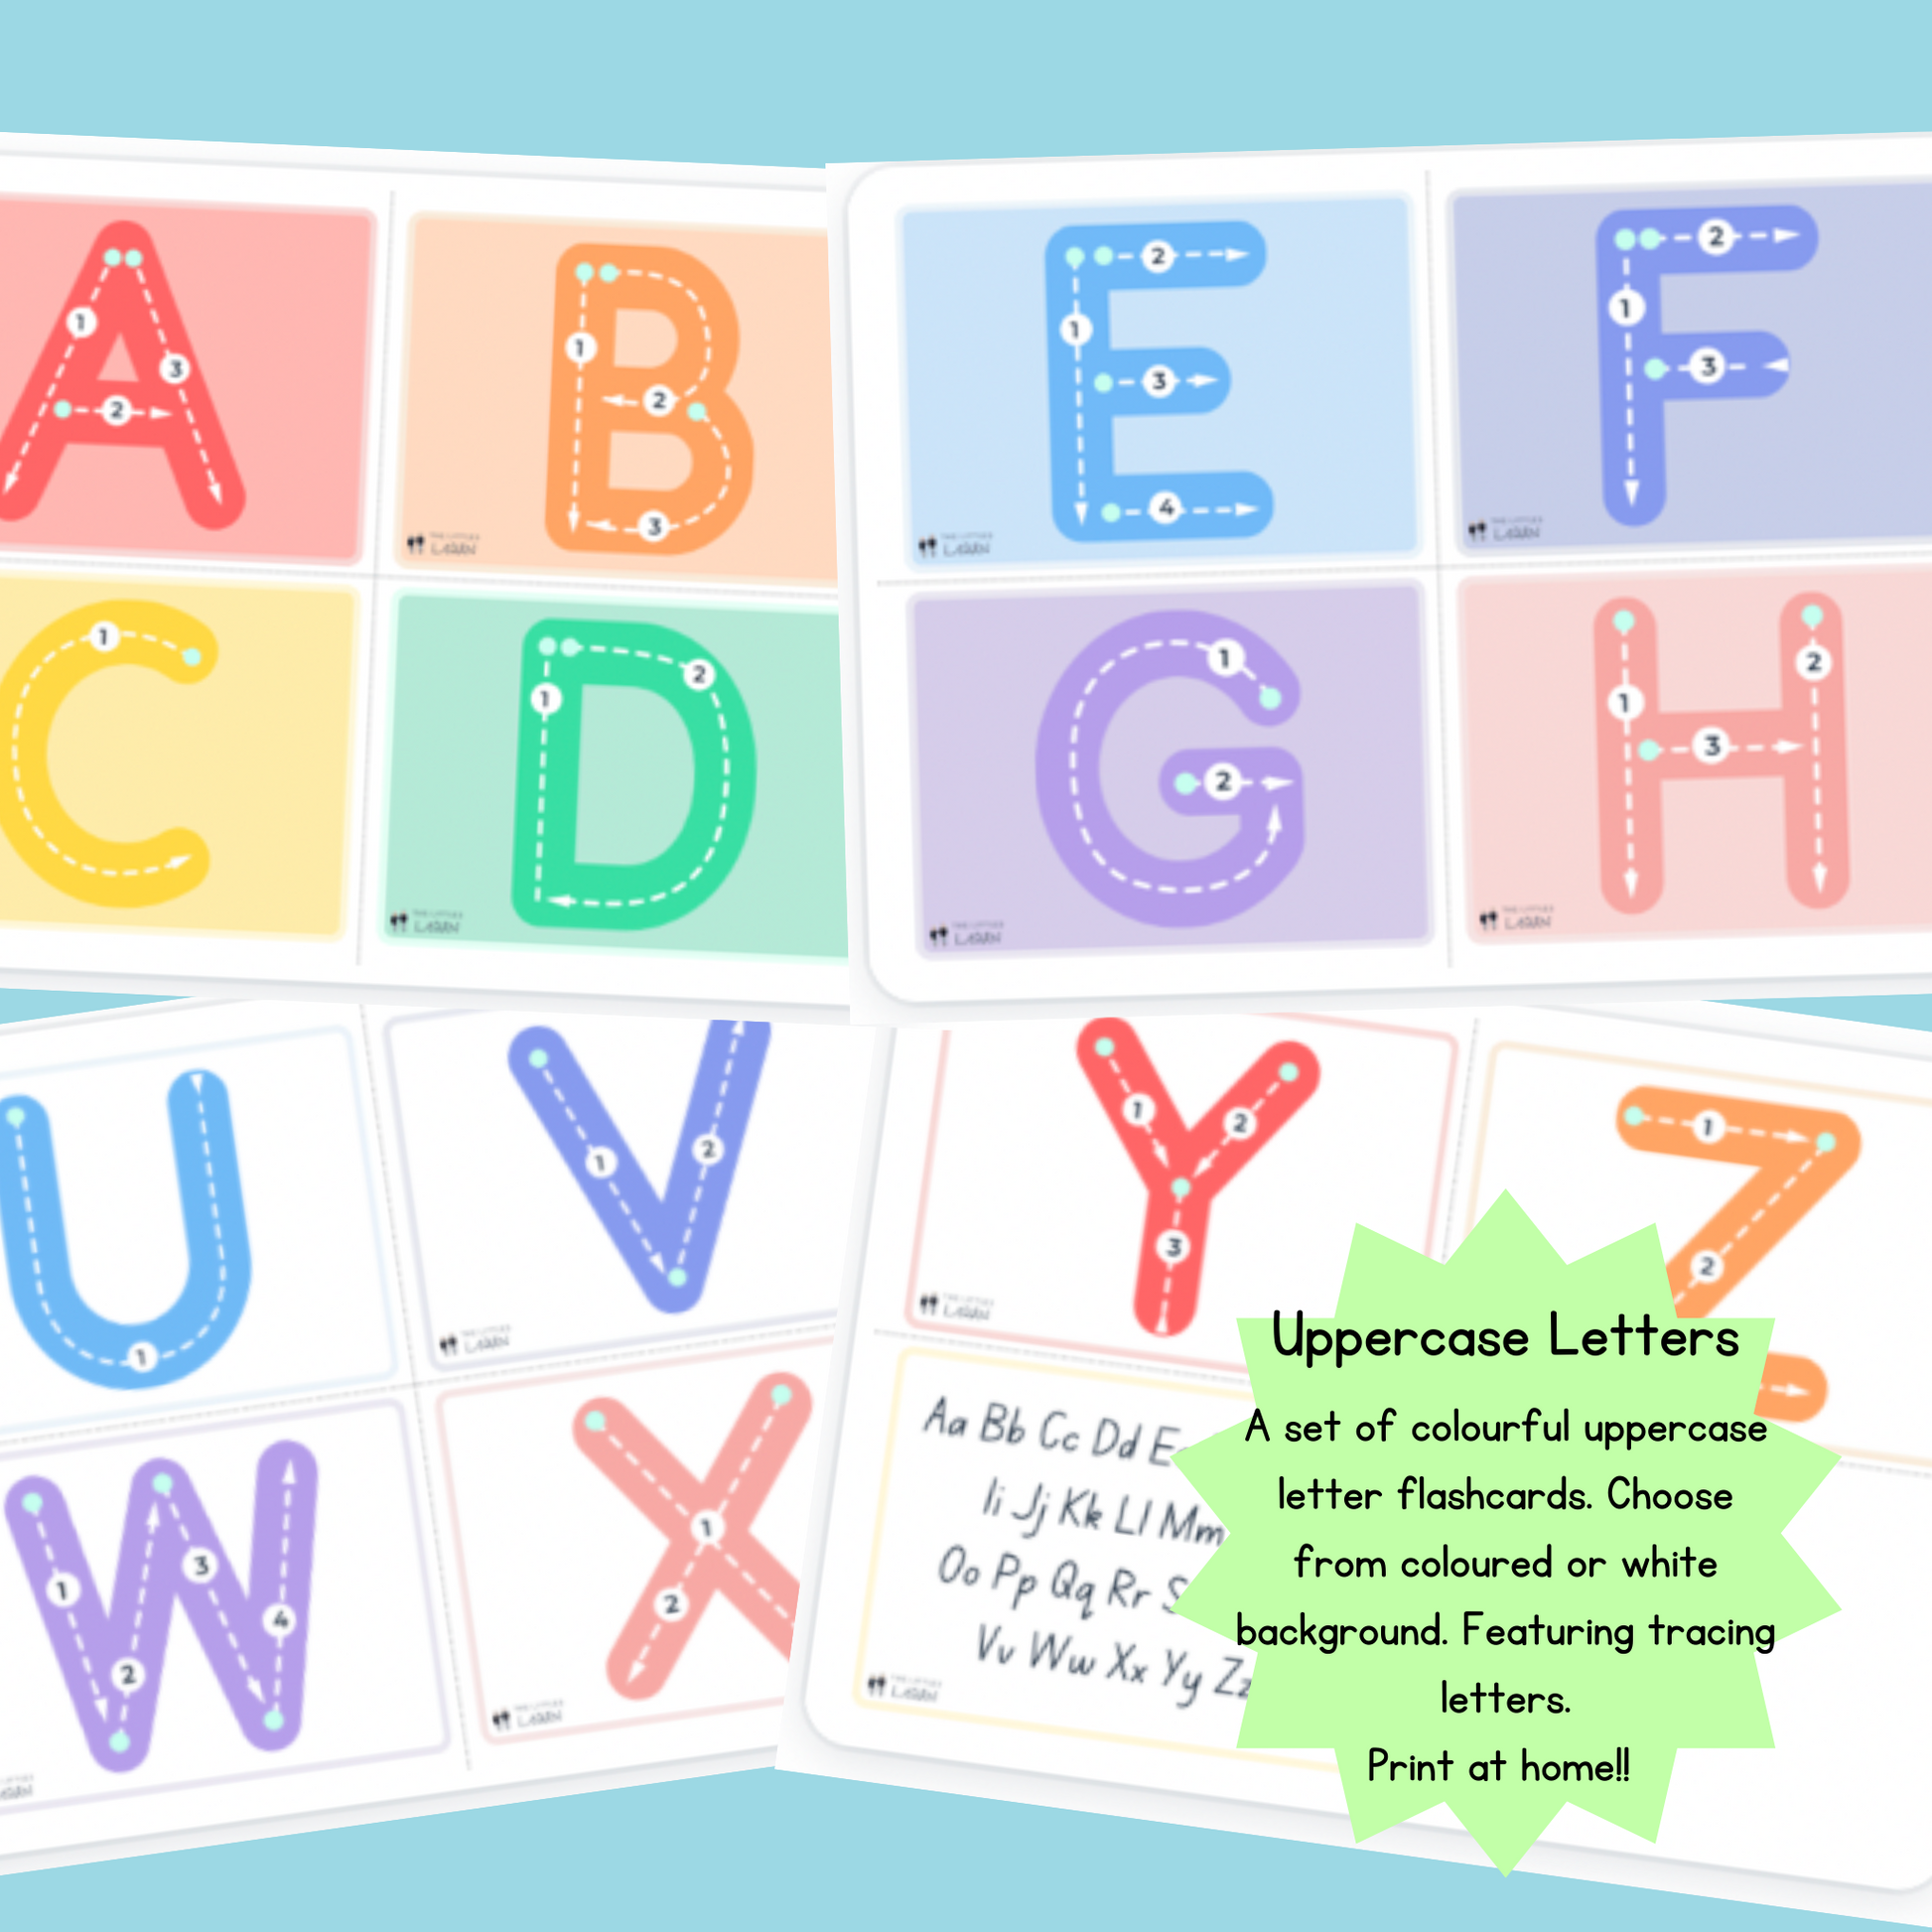 A set of colourful uppercase letter flash cards with lines for tracing the letters and to create a tactile learning experience.